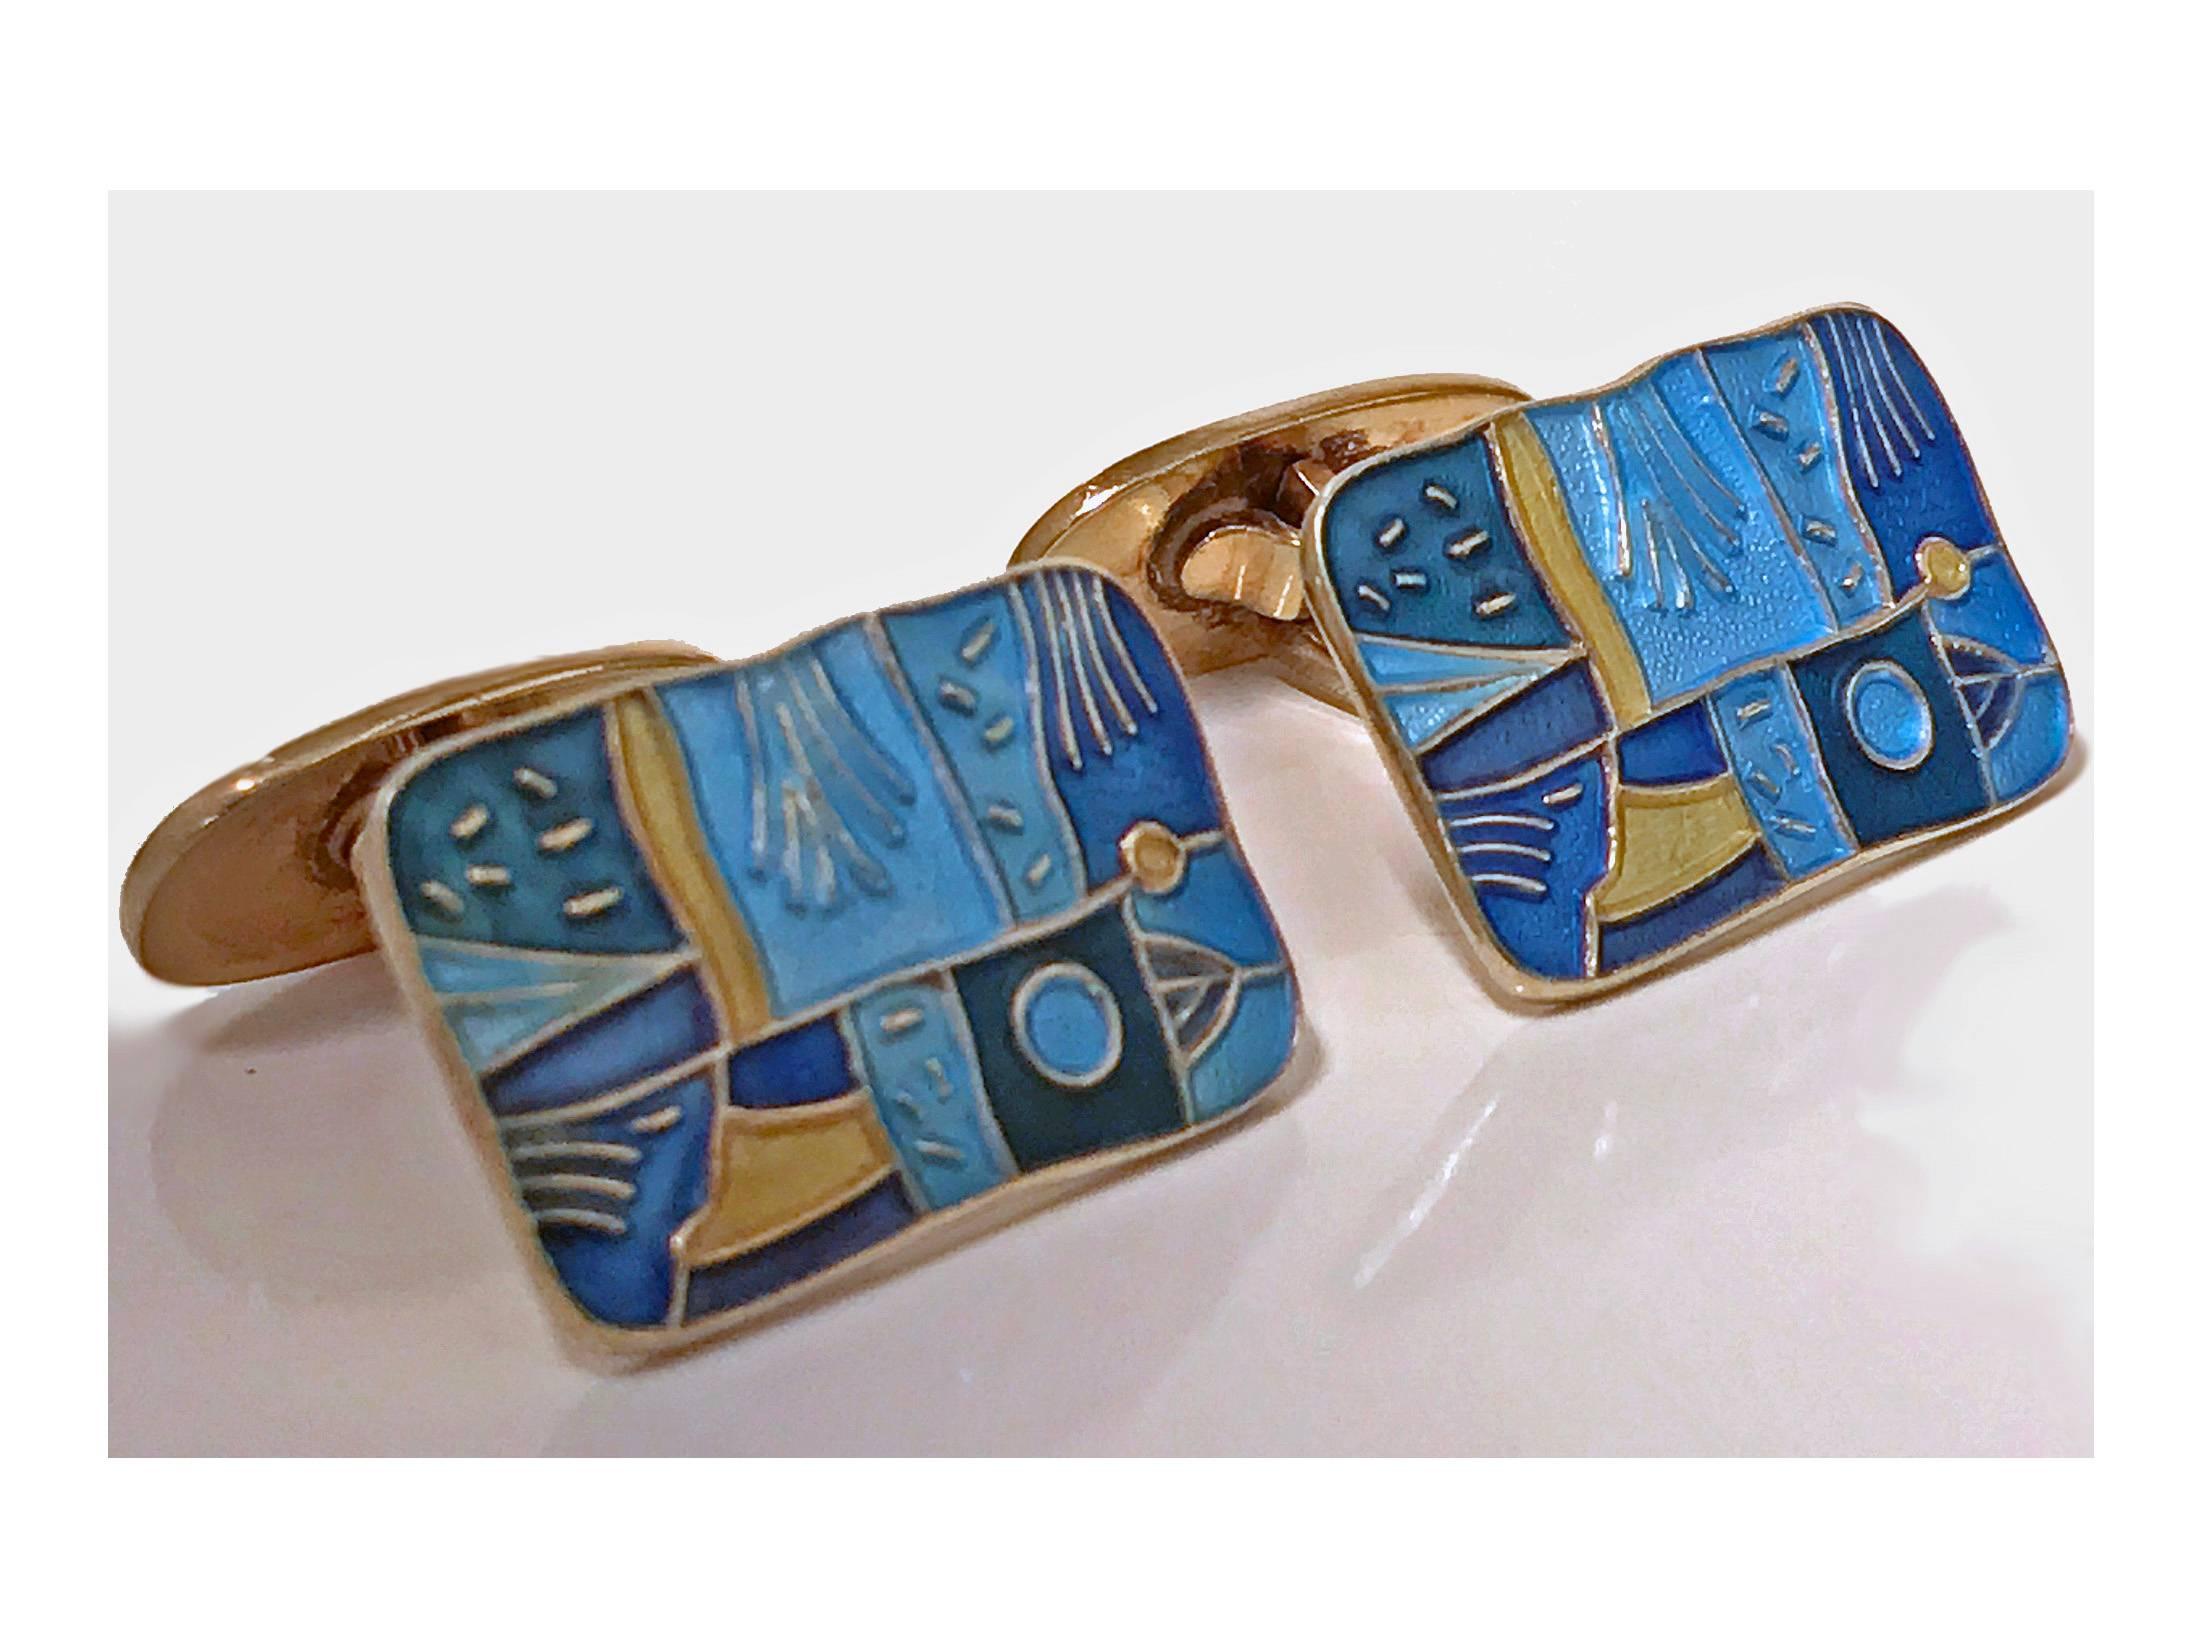 Pair of enamel and sterling silver with vermeil finish Spring' Cufflinks, Oslo, Norway C. 1959, David Andersen. The Cufflinks of rectangular shaped form inlaid with a varied blue and gold enamel colours of an art style. Hinged oval back. Fully